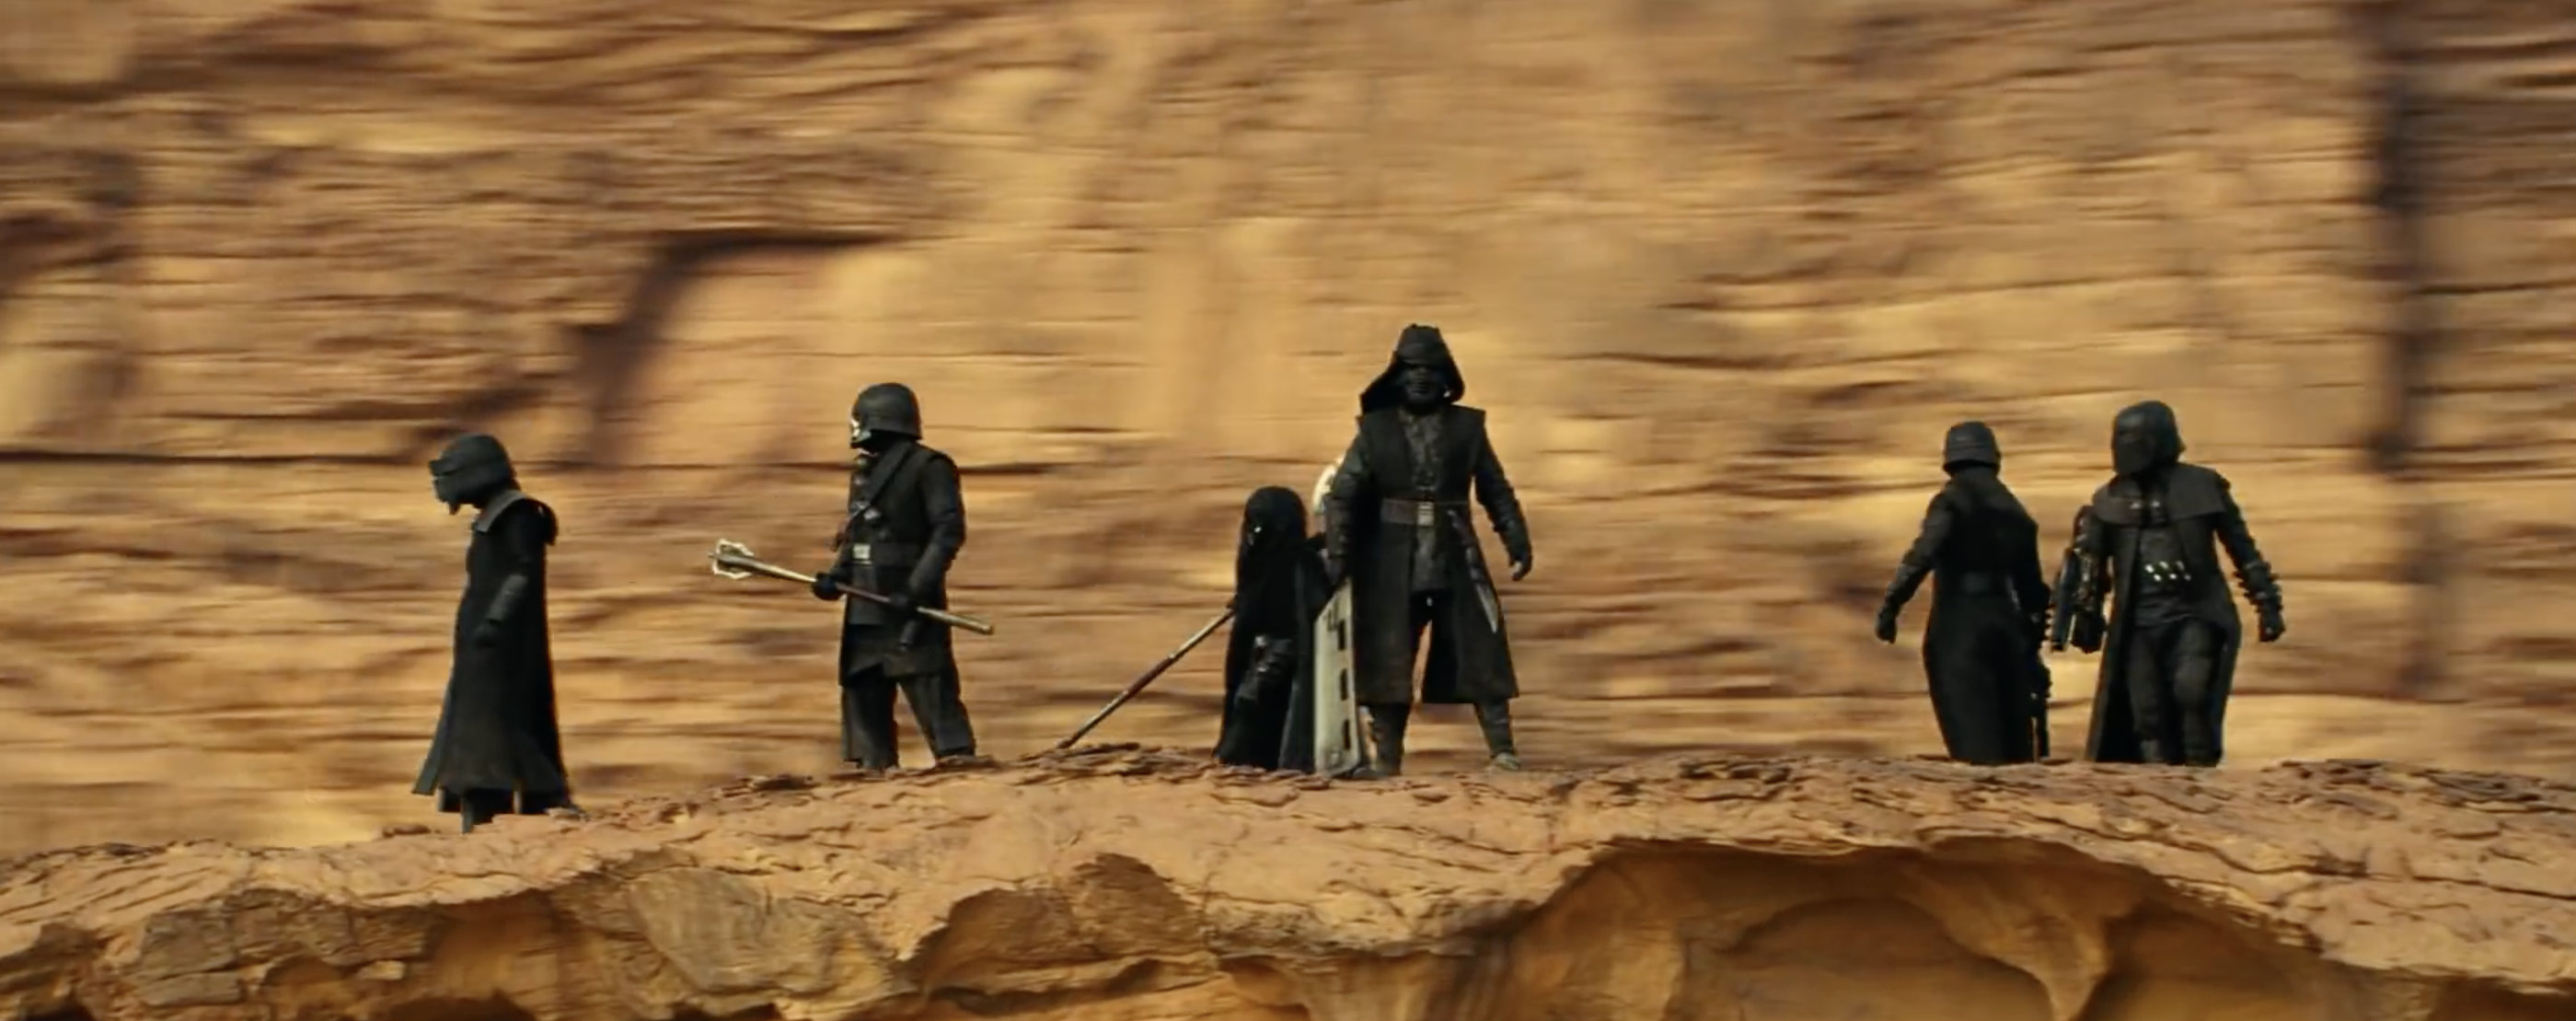 Star Wars: The Rise of Skywalker TV Spot Shows the Knights of Ren